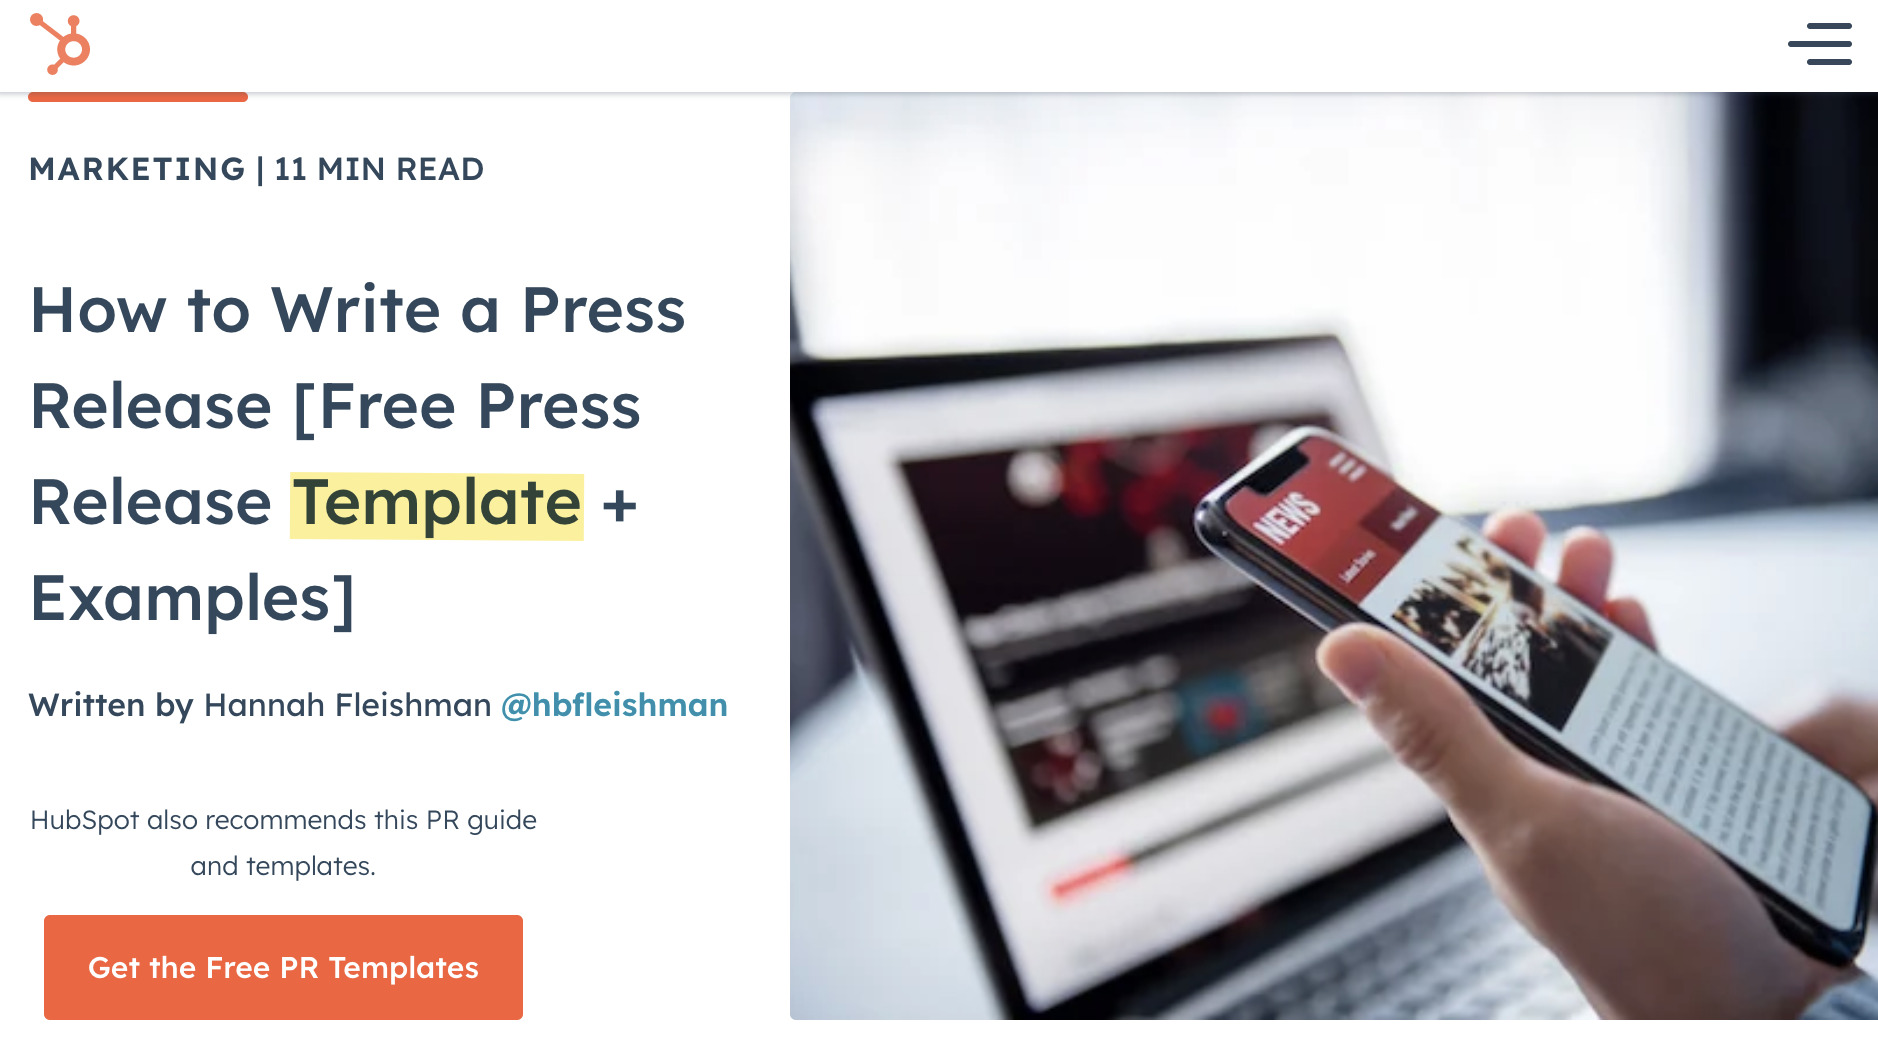 Example of another page ranking for "how to write a press release" with a free template
